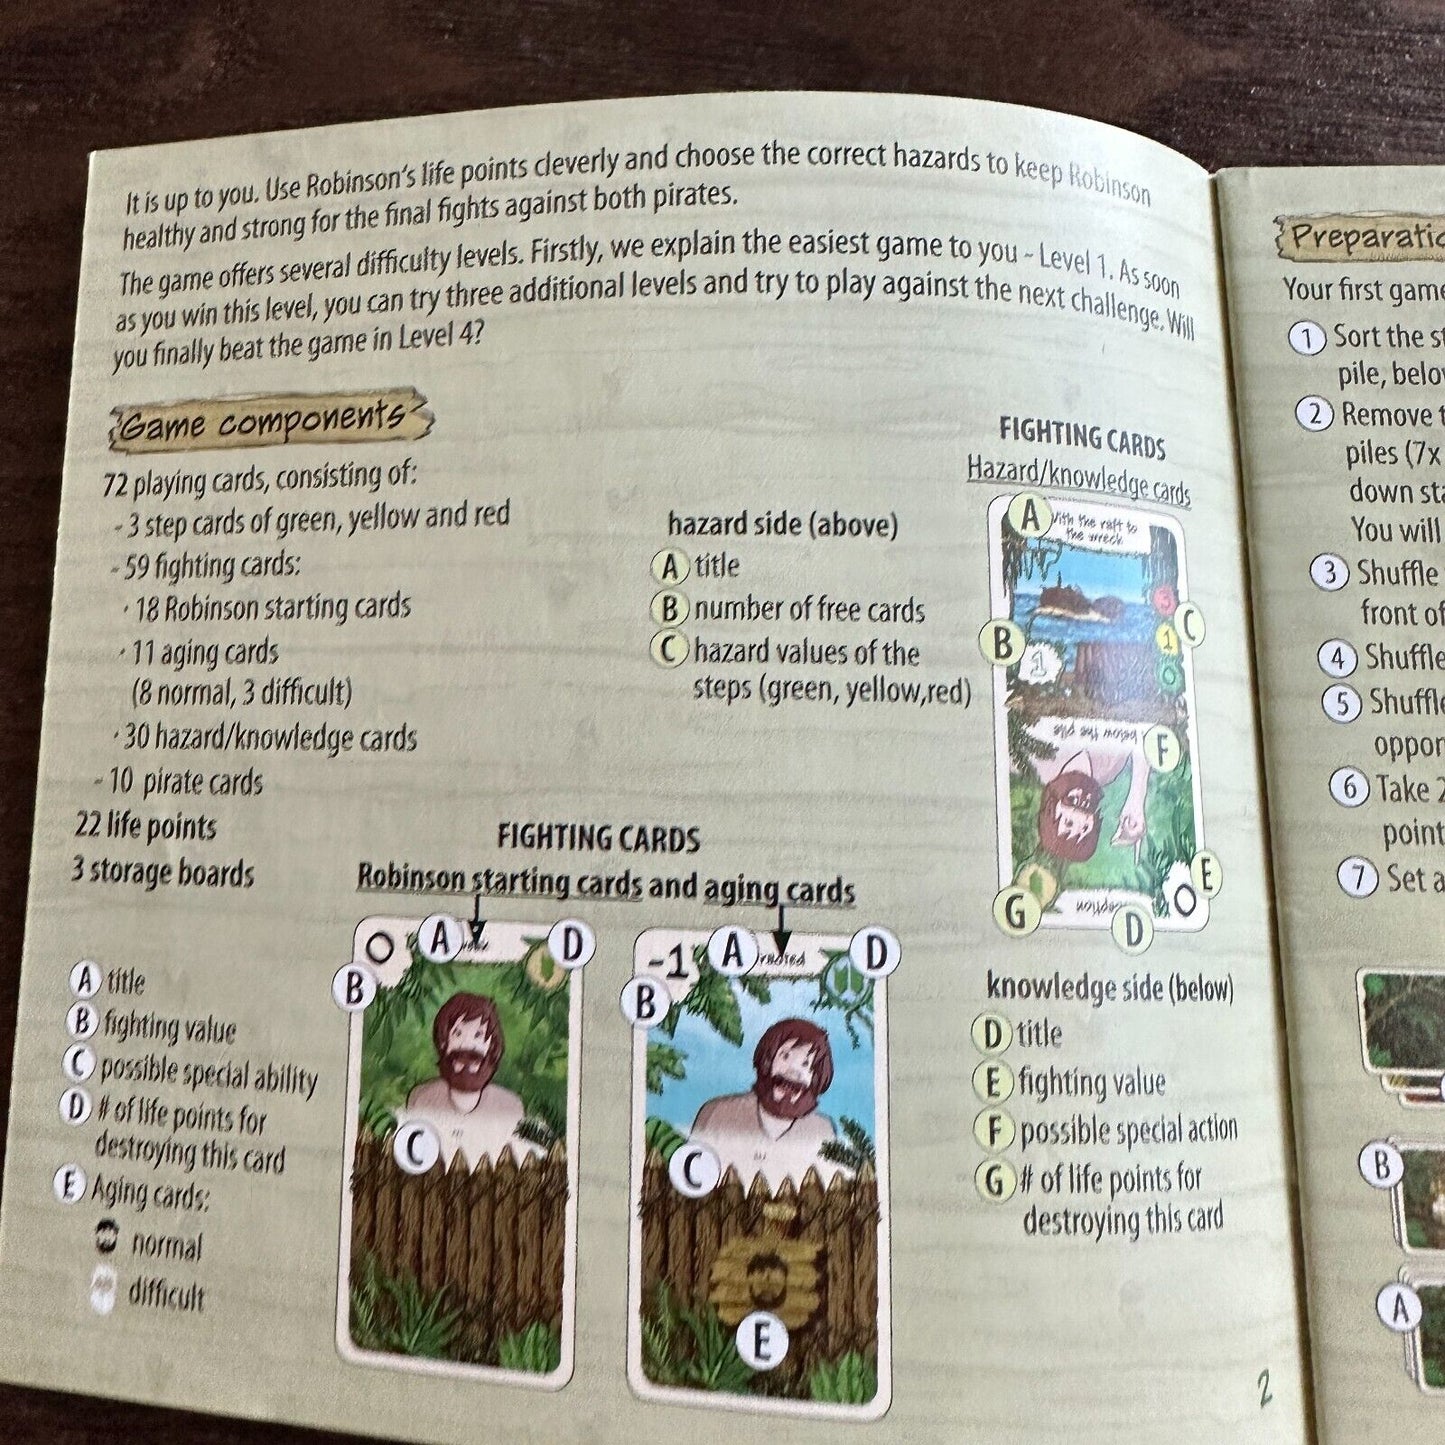 Friday Card Game A Solo Adventure Complete Survival RPG By Friedmann Friese